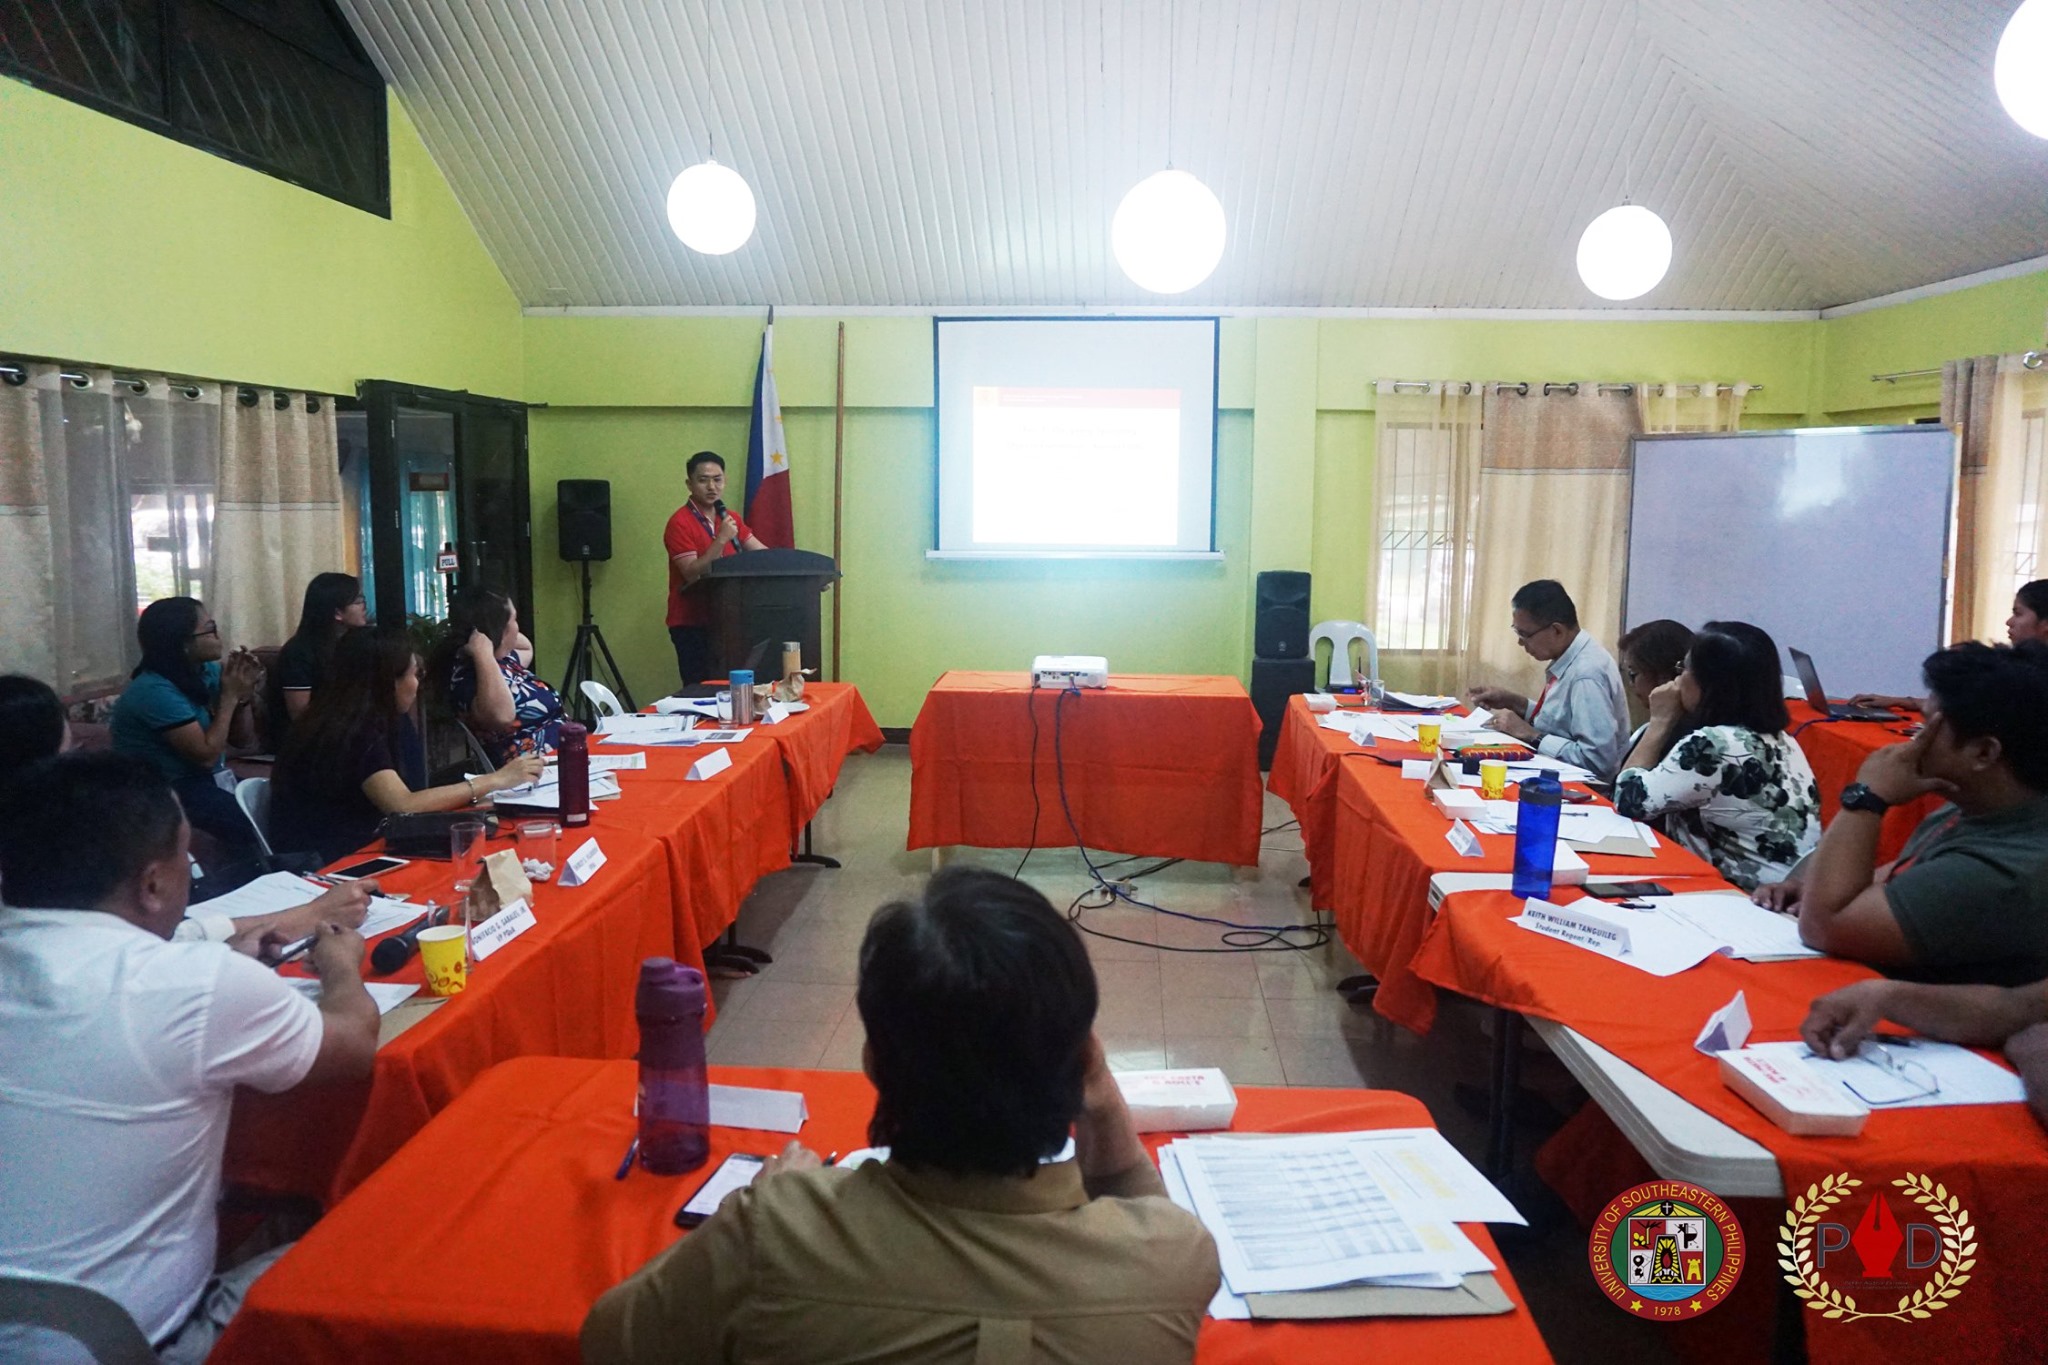 NOVEMBER 6-7, 2019 – University of Southeastern Philippines (USeP) Fiscal Year (FY) 2021 Budget Review and Consultation at USeP Hostel, Dining Hall